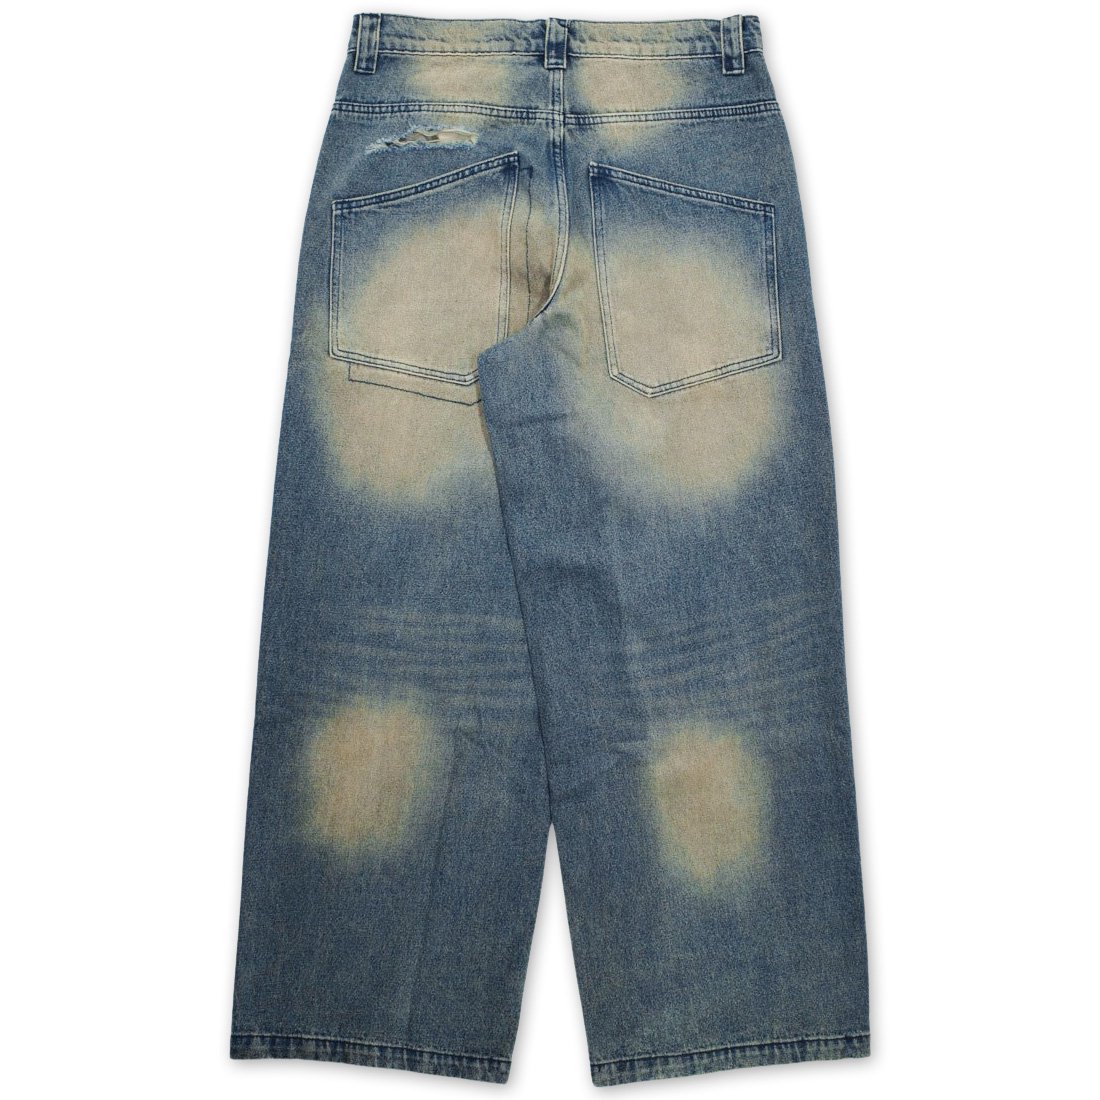 JADED LONDON BUSTED COLOSSUS JEANS - Spyder｜セレクトショップ ...